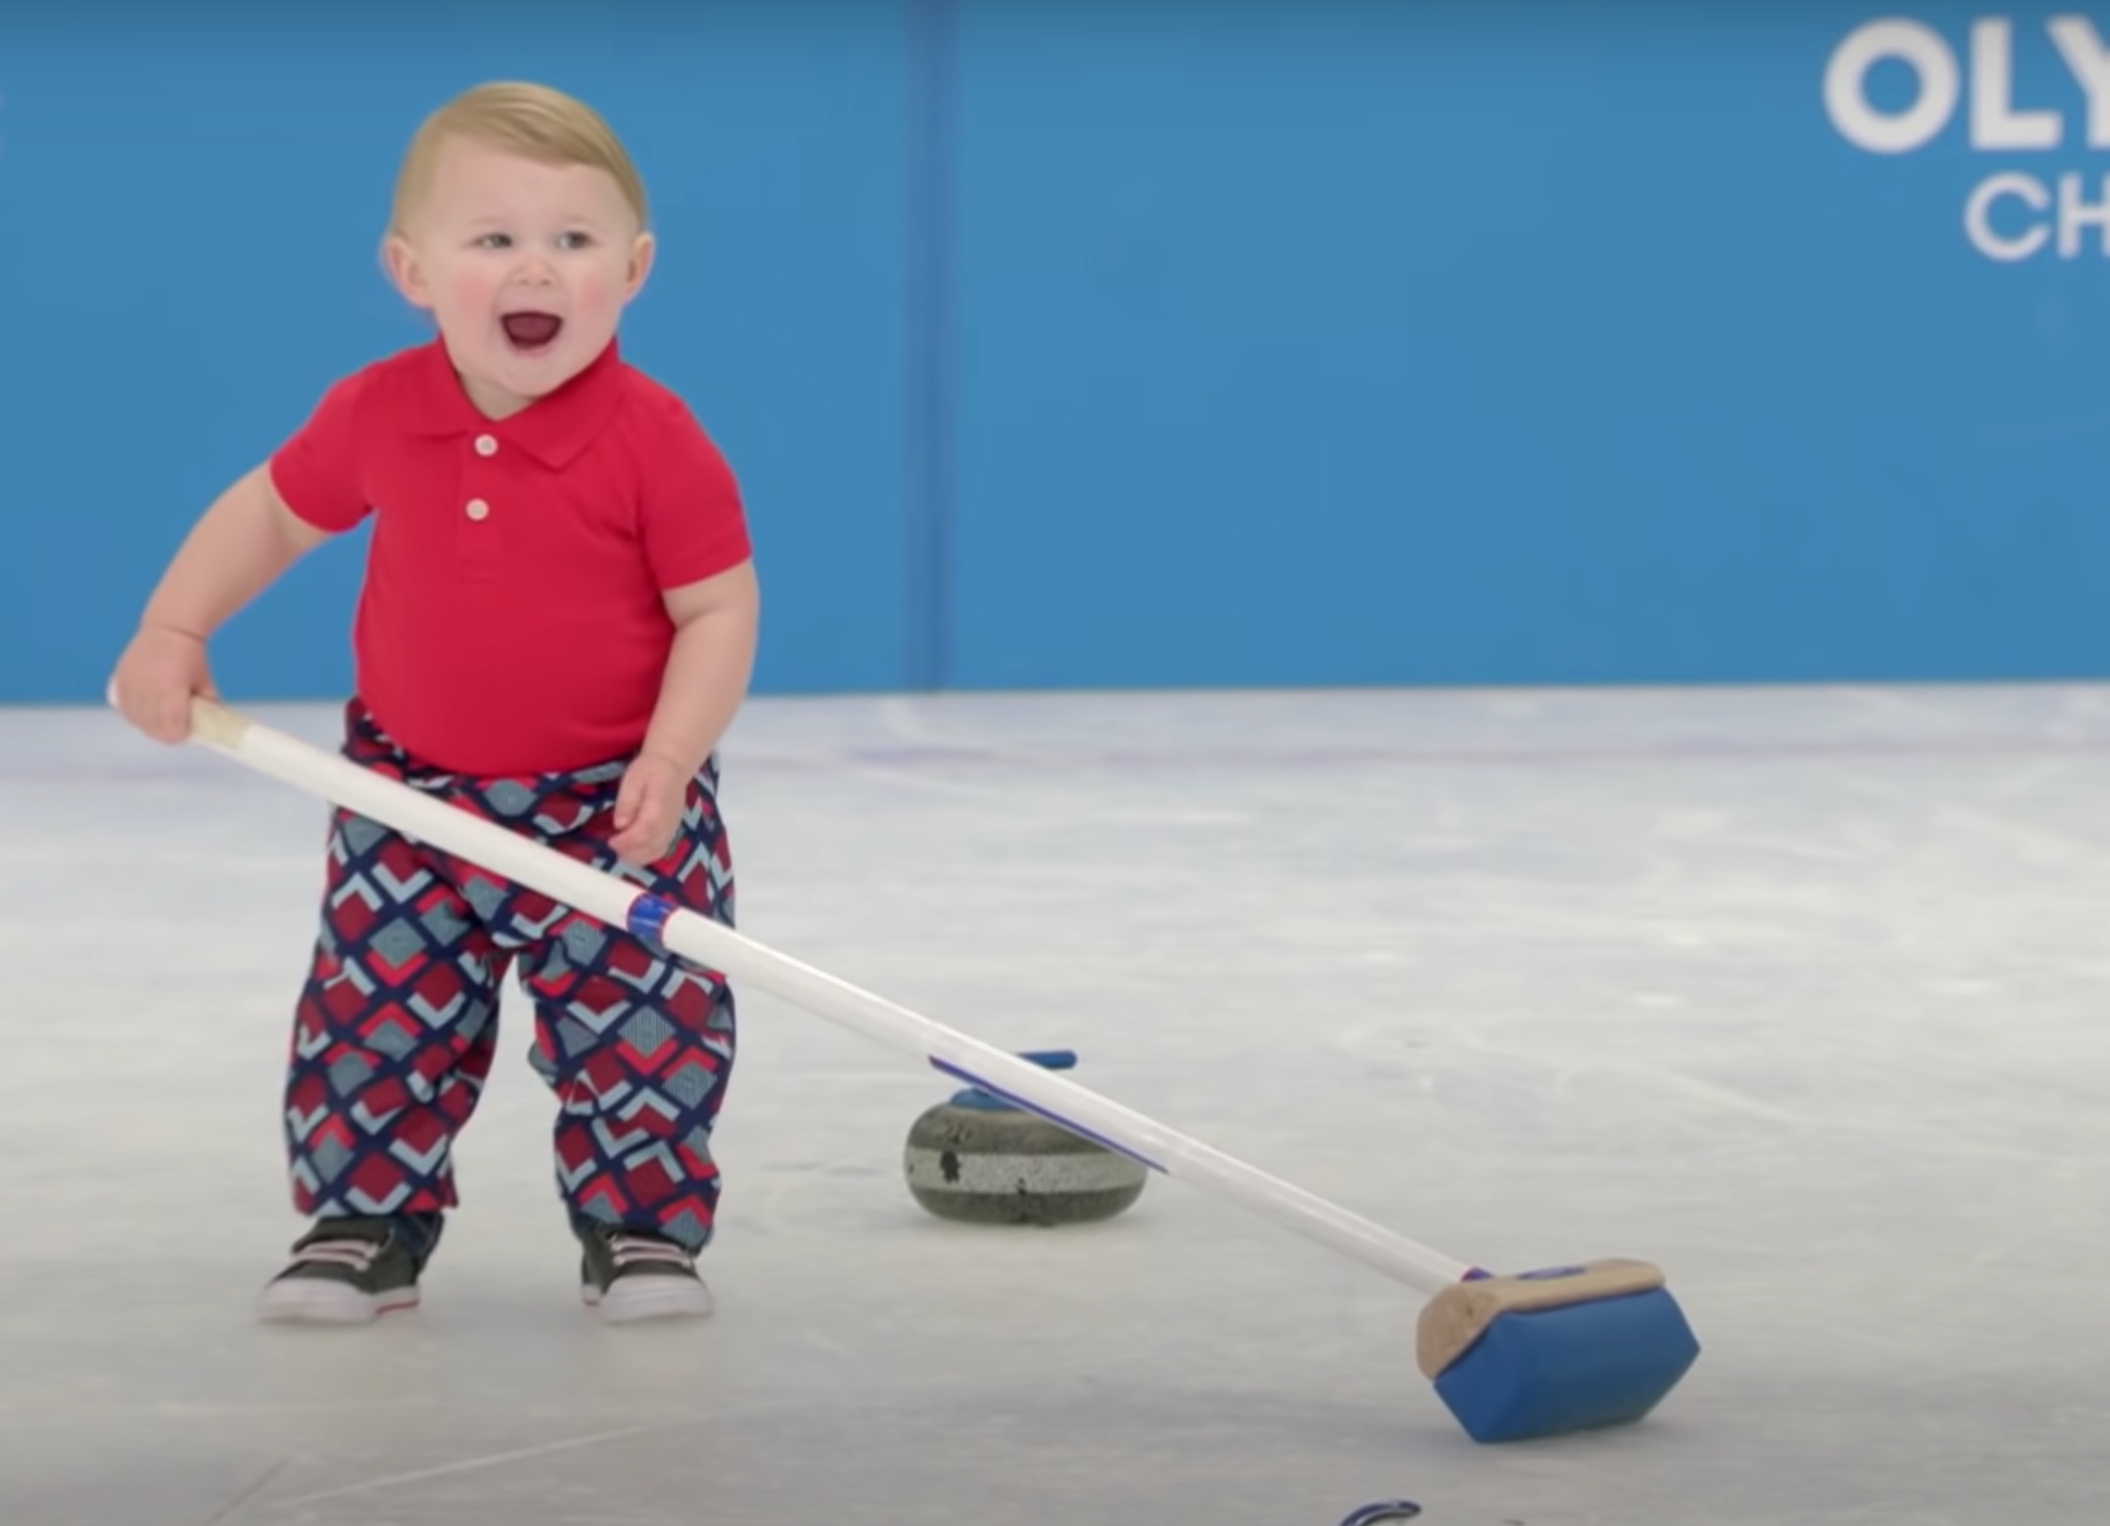 If Toddlers Competed In The Winter Olympics...